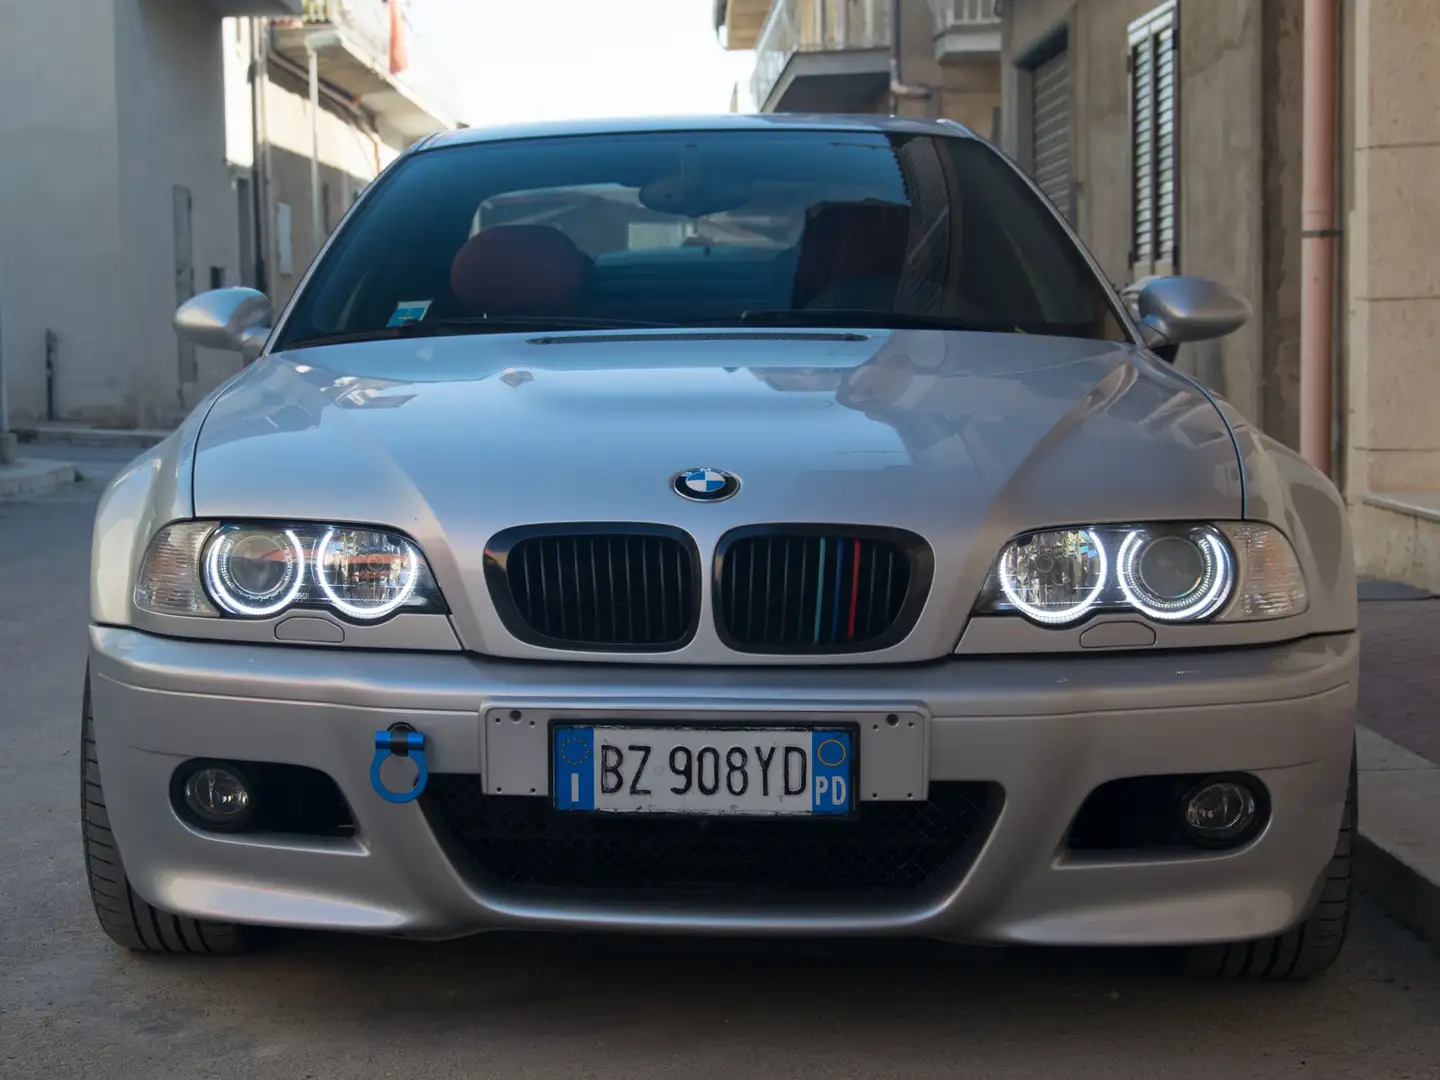 BMW M3 coupe manuale ASI con CRS siva - 1